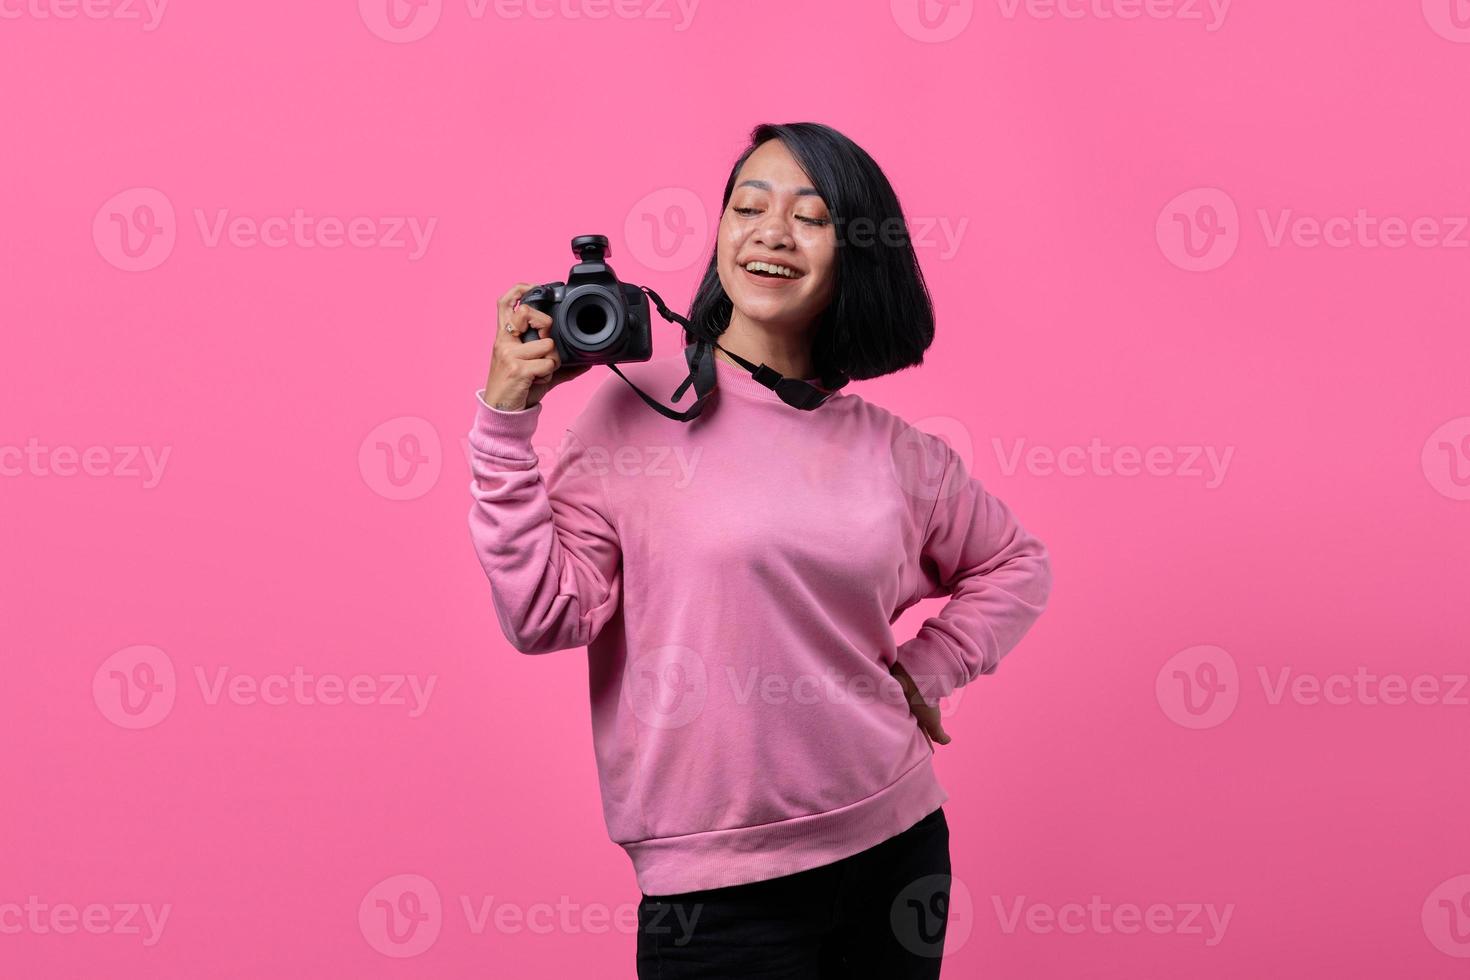 Happy smiling young woman holding camera on pink background photo